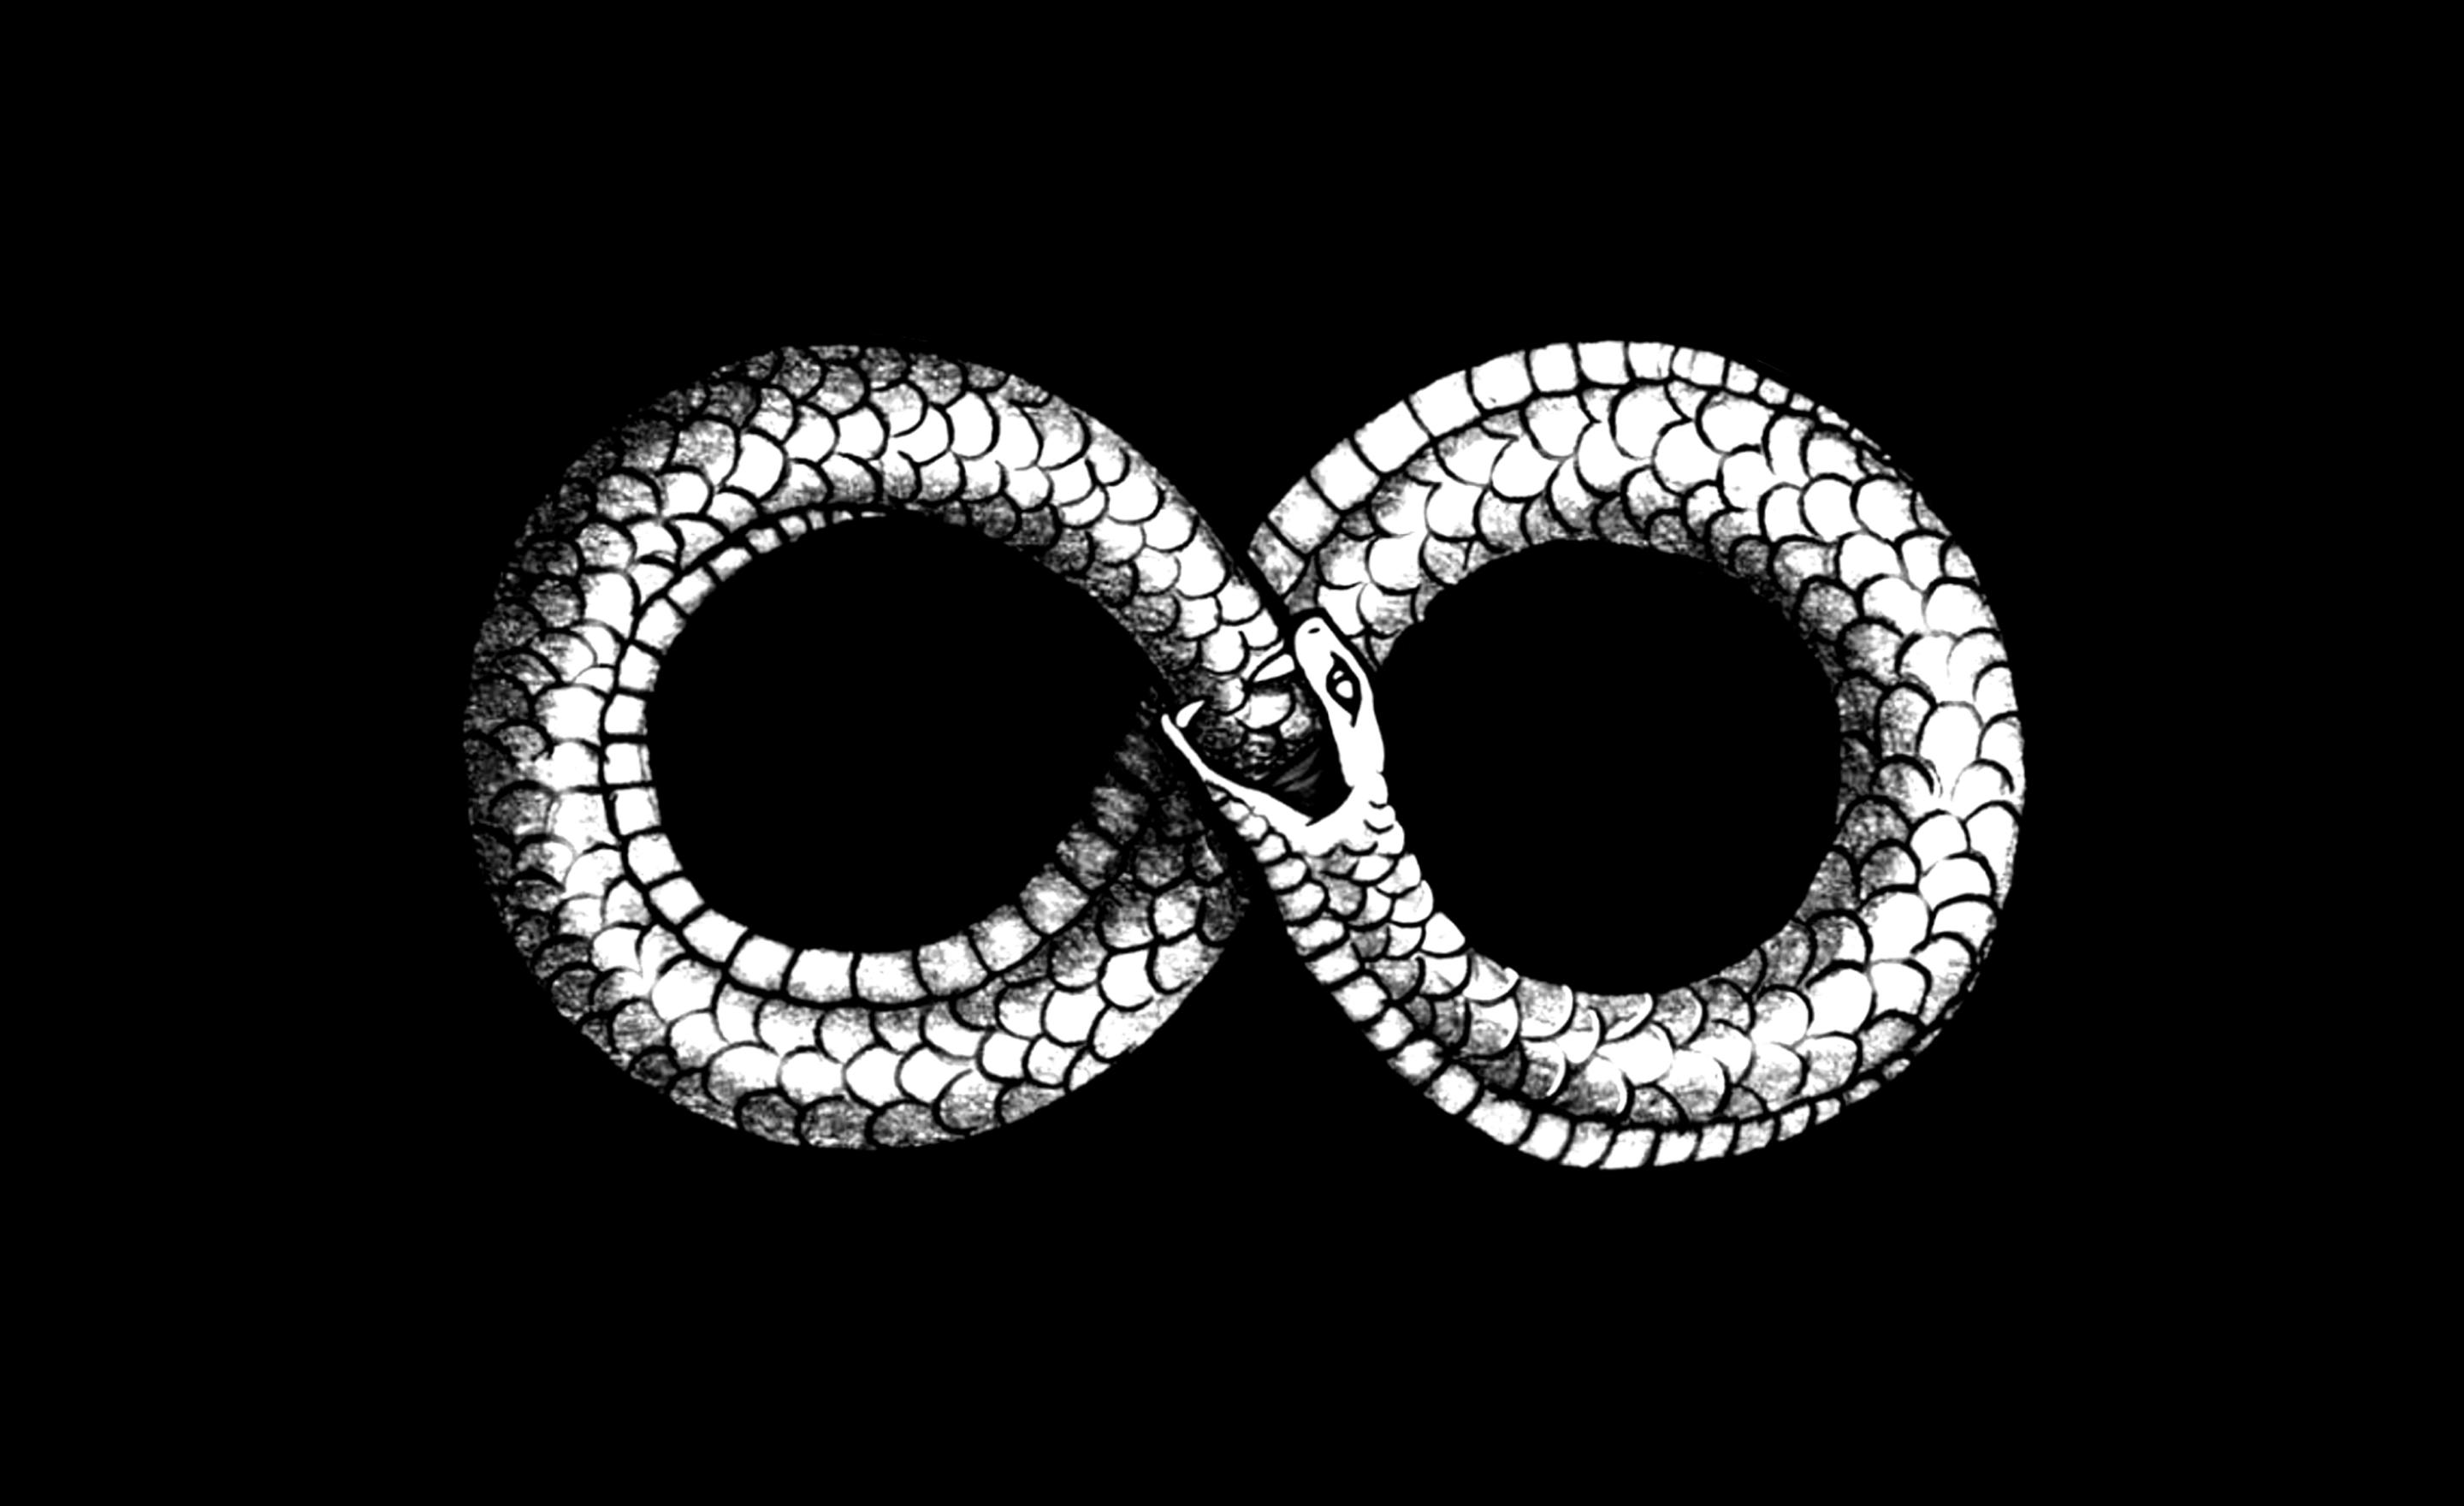 illustration of a snake eating its tail forming an infinite symbol